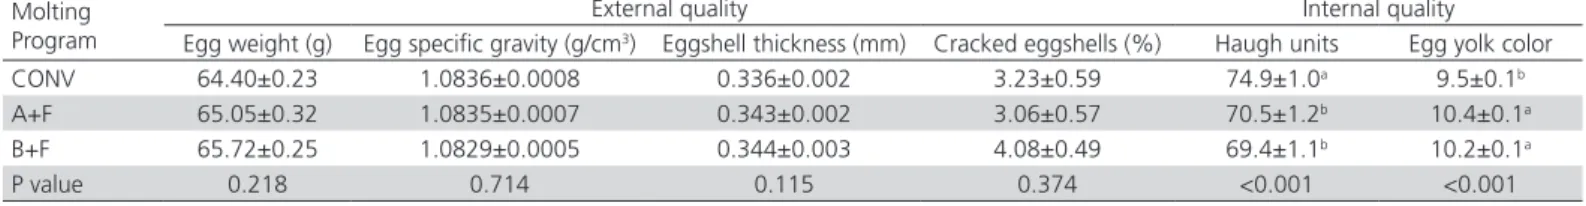 Table 6 – Effect of molting methods on some external and internal egg quality parameters (mean ± SE)